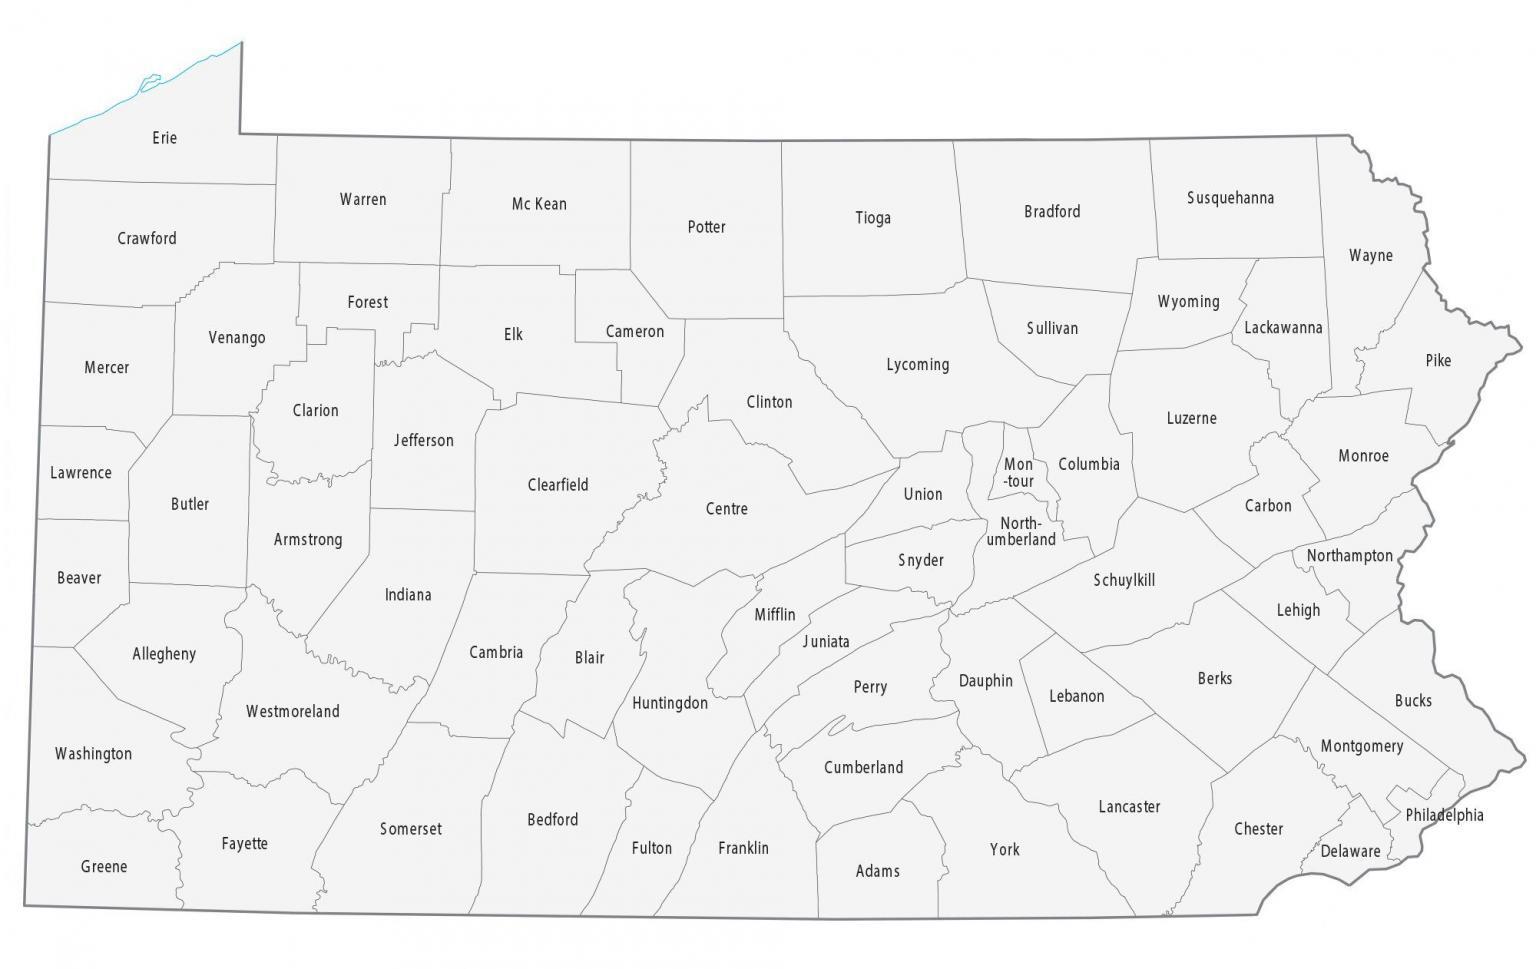 map-of-pennsylvania-cities-and-roads-gis-geography